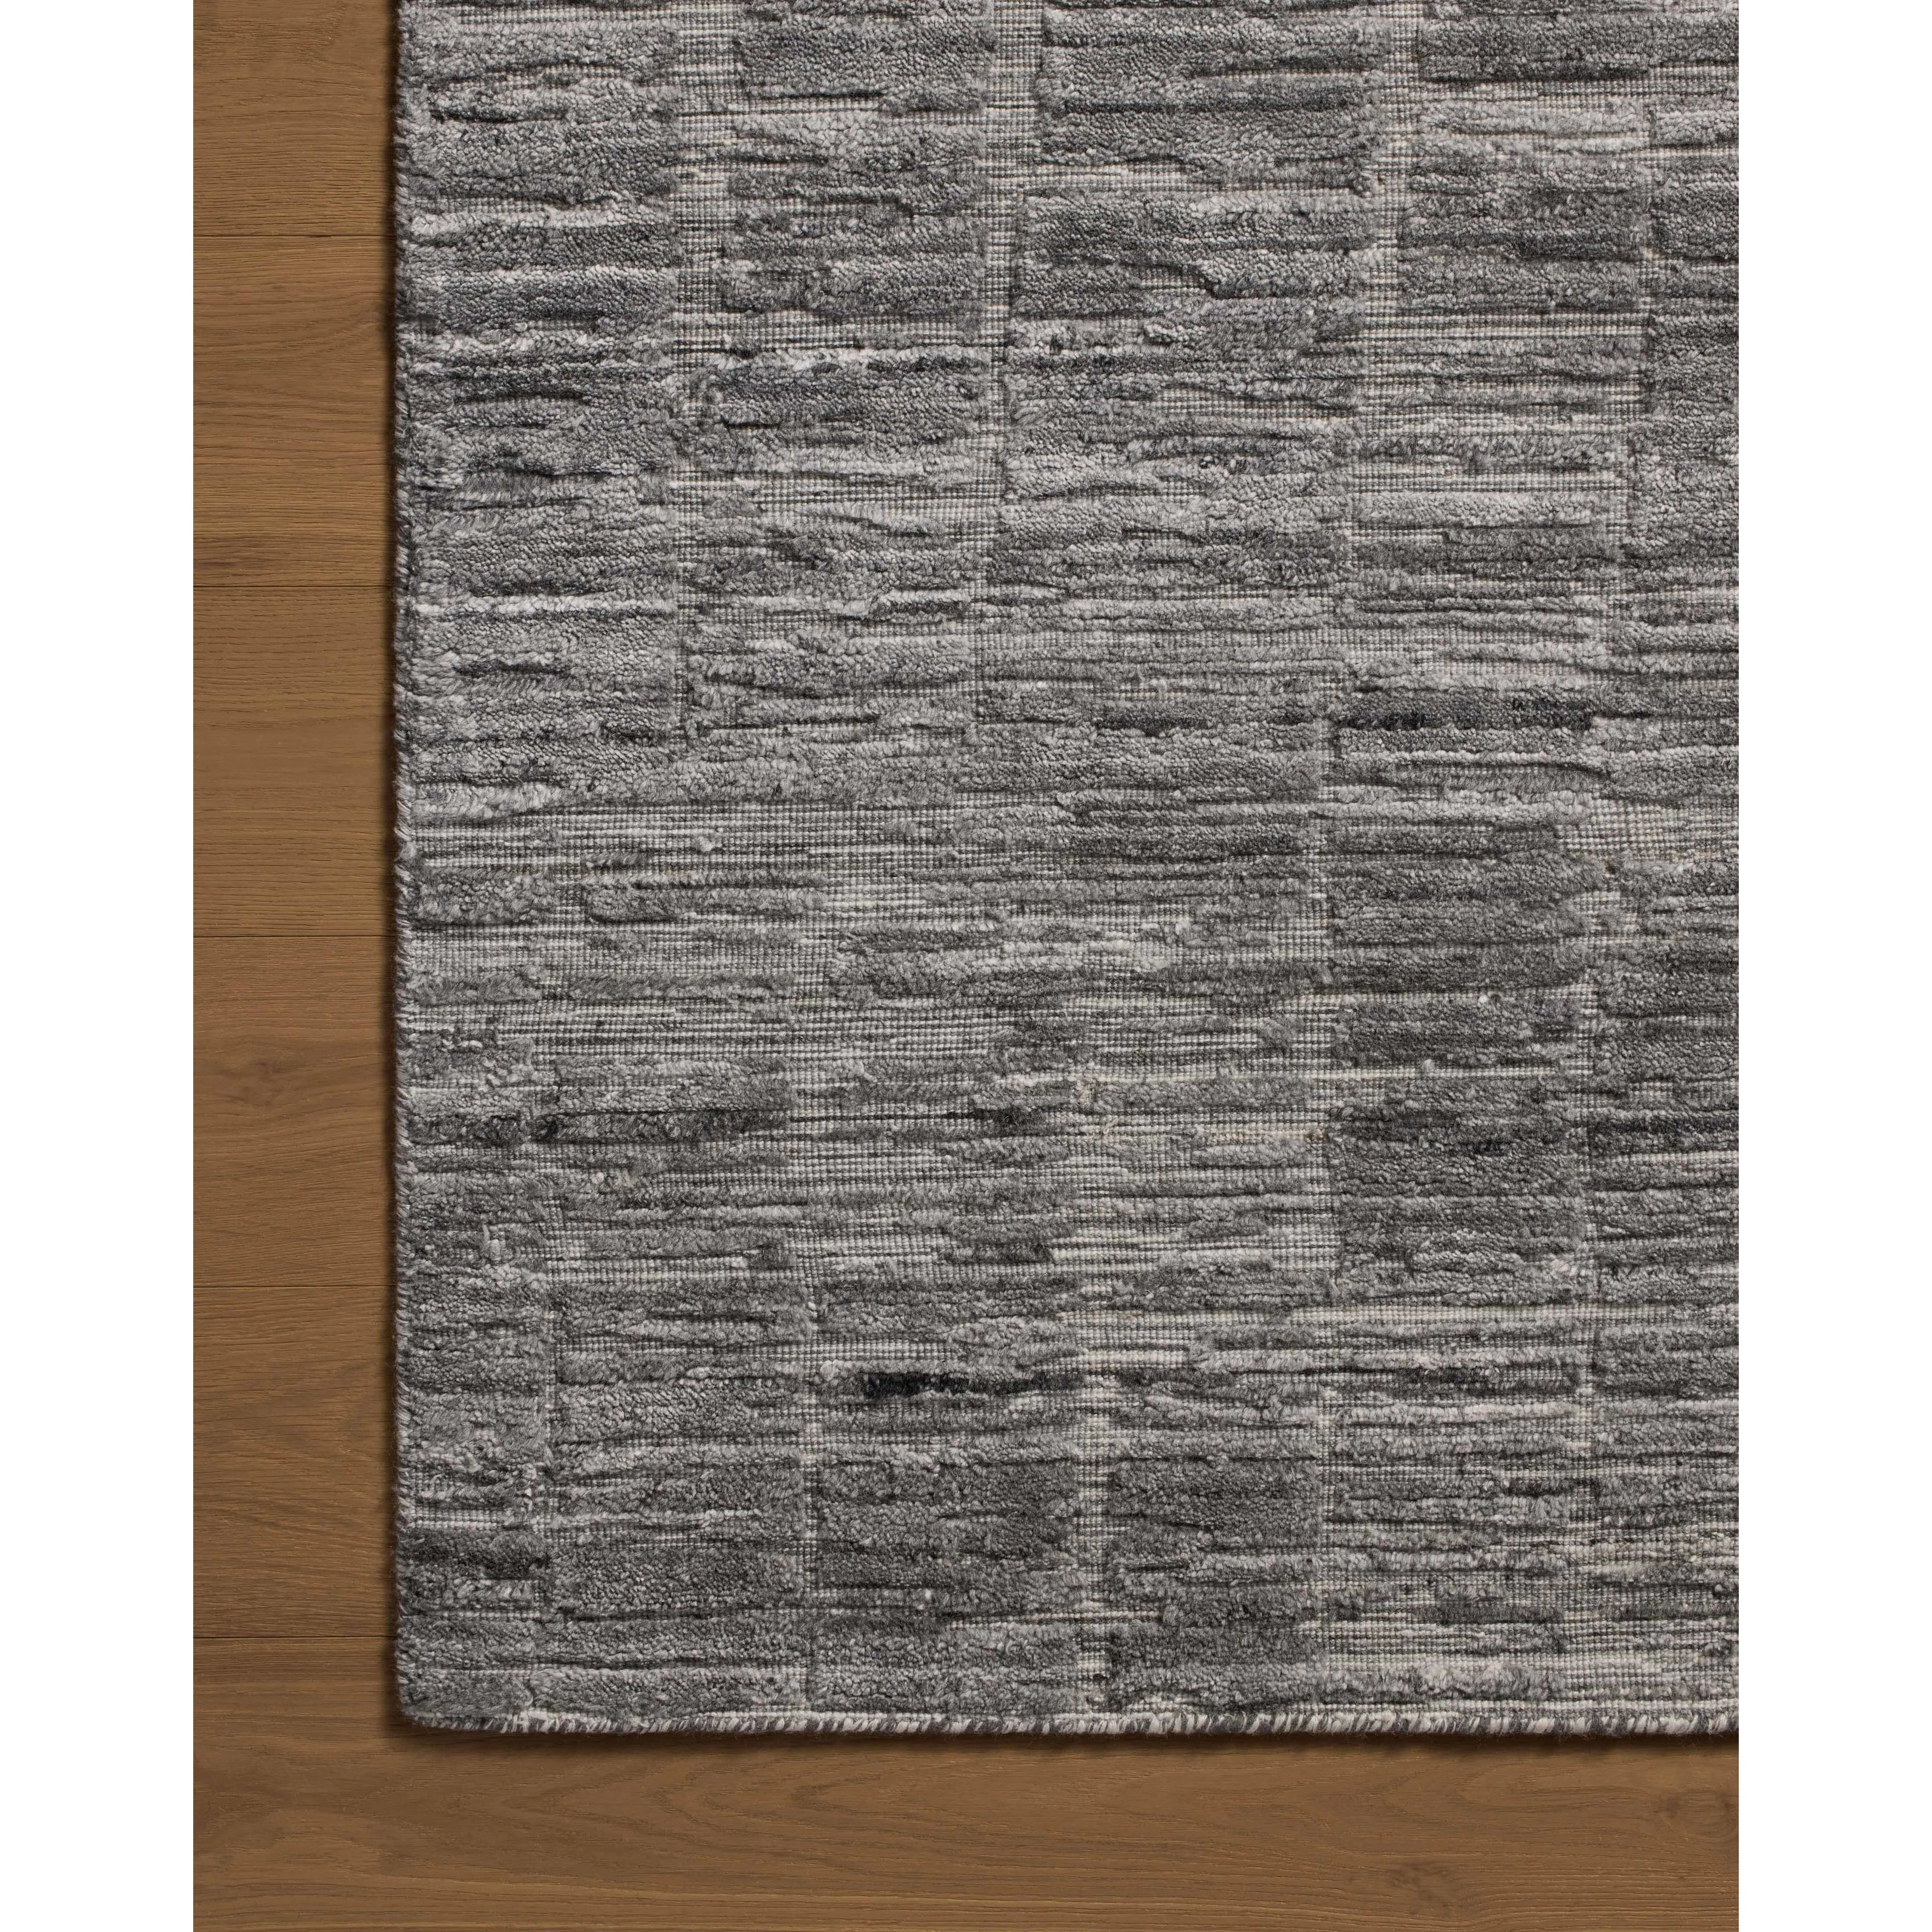 Area rugs in the Daniel Slate Rug have a graphic design in a range of tonal palettes with a soft, gently ribbed texture. The hand-loomed pile is a blend of bamboo and wool with a slight sheen that captures the light and changes the rug’s sense of depth throughout the day. Amethyst Home provides interior design, new home construction design consulting, vintage area rugs, and lighting in the Dallas metro area.